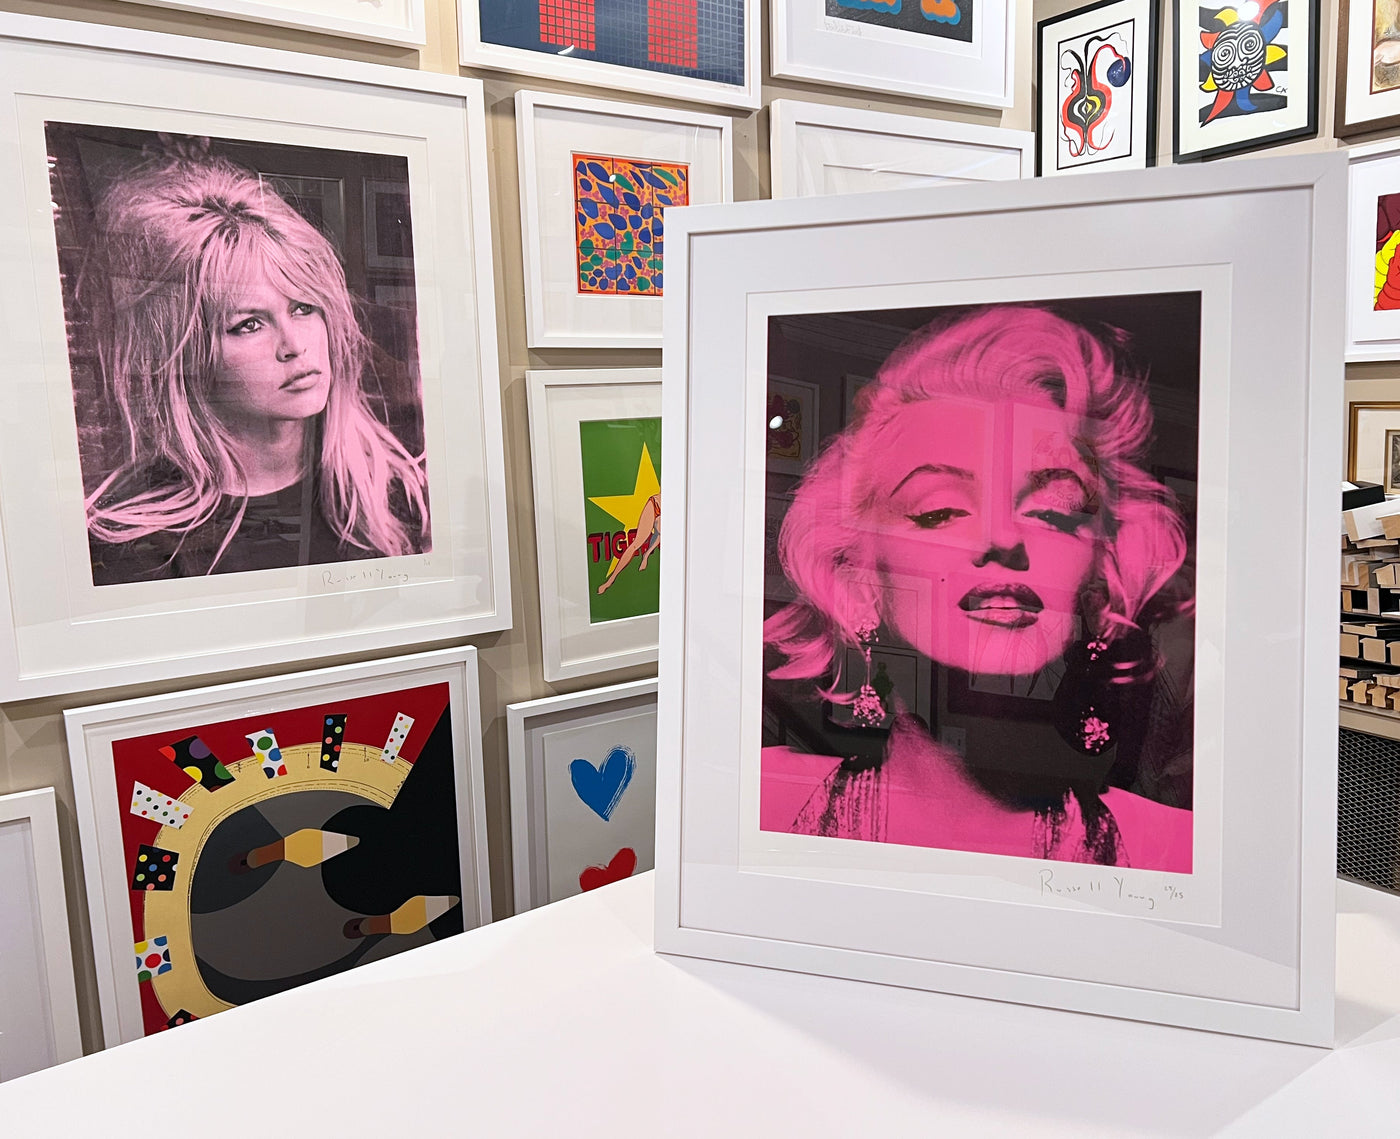 Russell Young Marilyn Portrait (Magenta) 2014